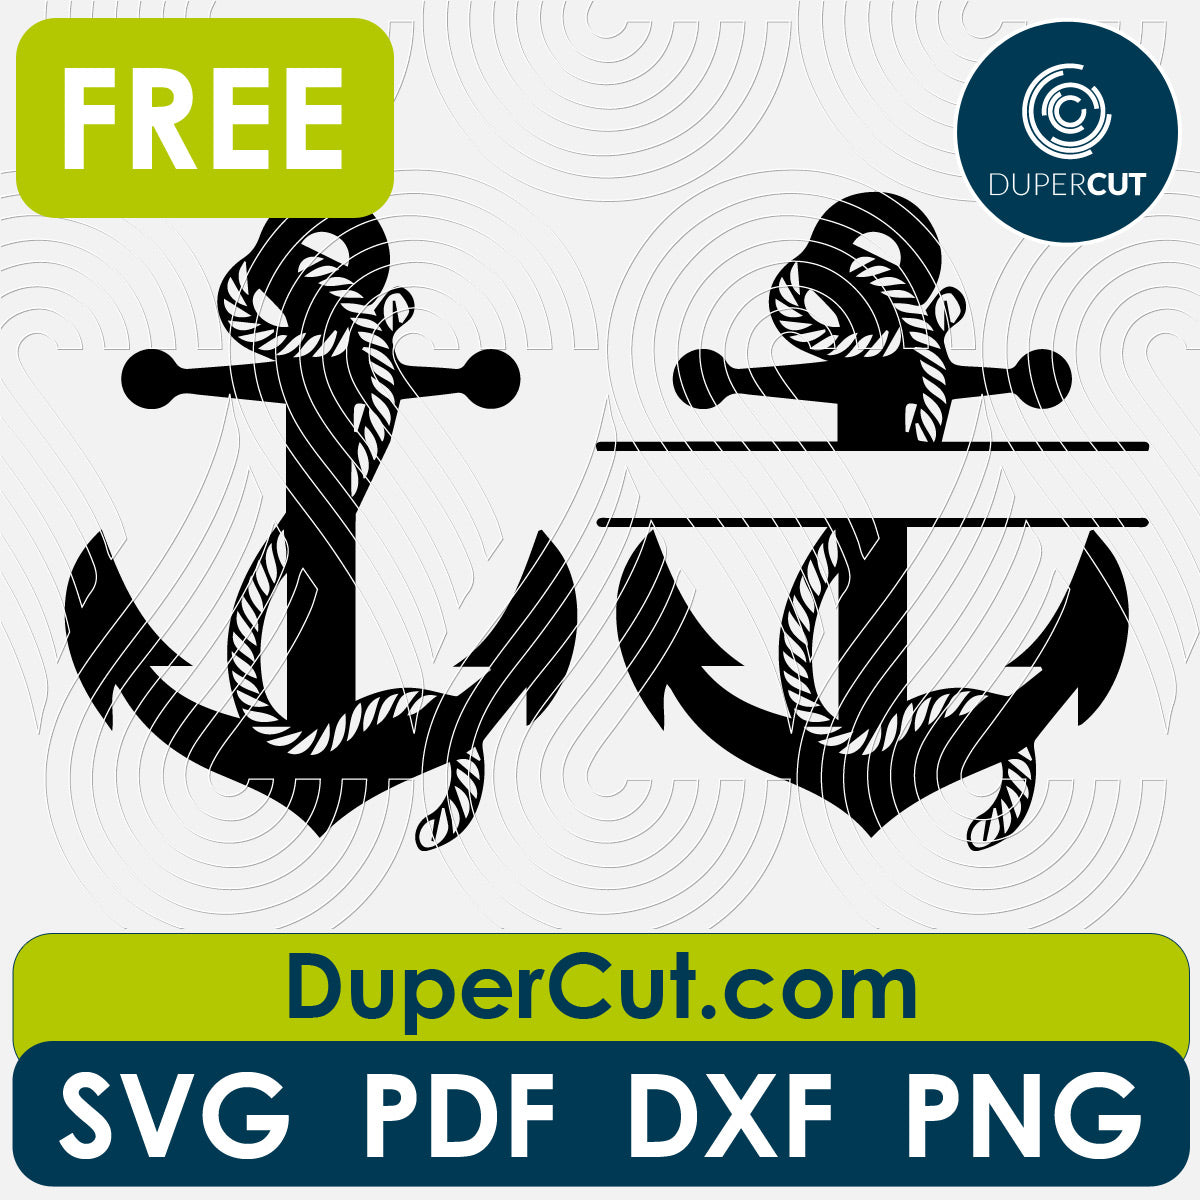 Anchor add custom text - free cutting files SVG DXF vector template for laser cutting and engraving. For Glowforge, Cricut, Silhouette, scroll saw, cnc plasma machines by DuperCut